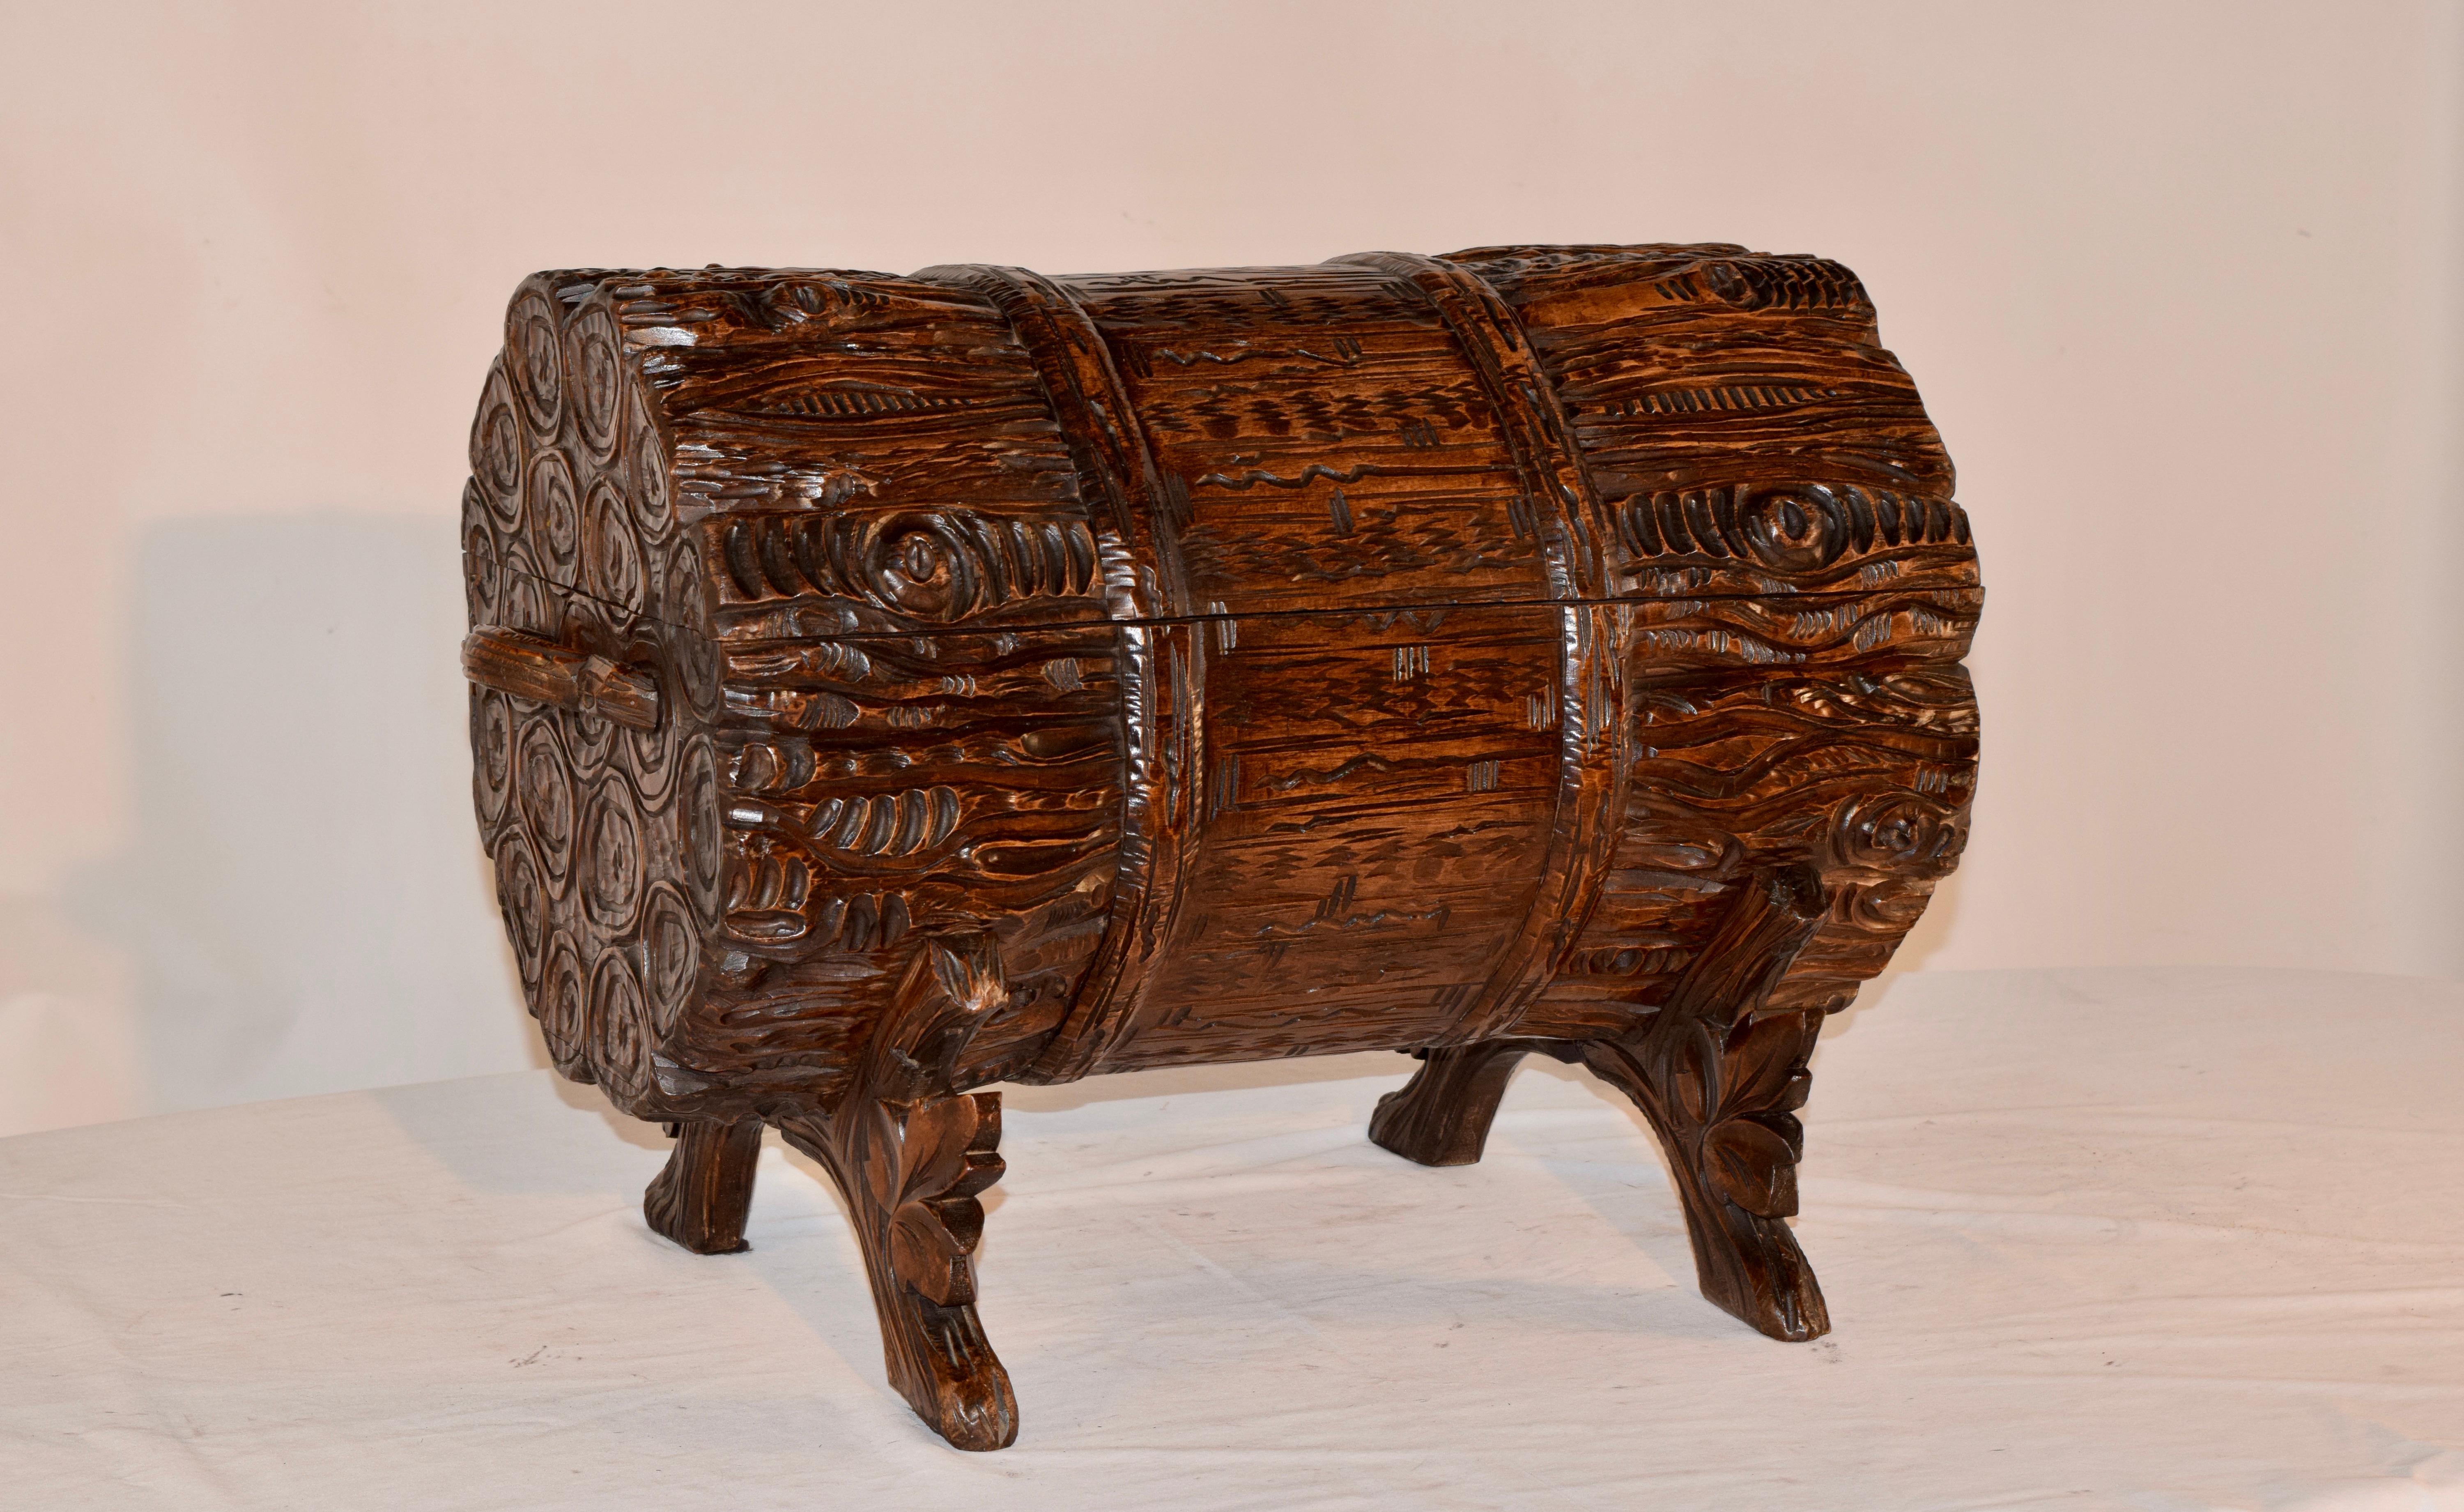 19th century masterfully hand carved Black Forest trunk in the shape of a bundle of logs. This top opens to reveal a lined storage area. This is supported on hand carved and shaped legs which are in the form of branches with leaf decoration.